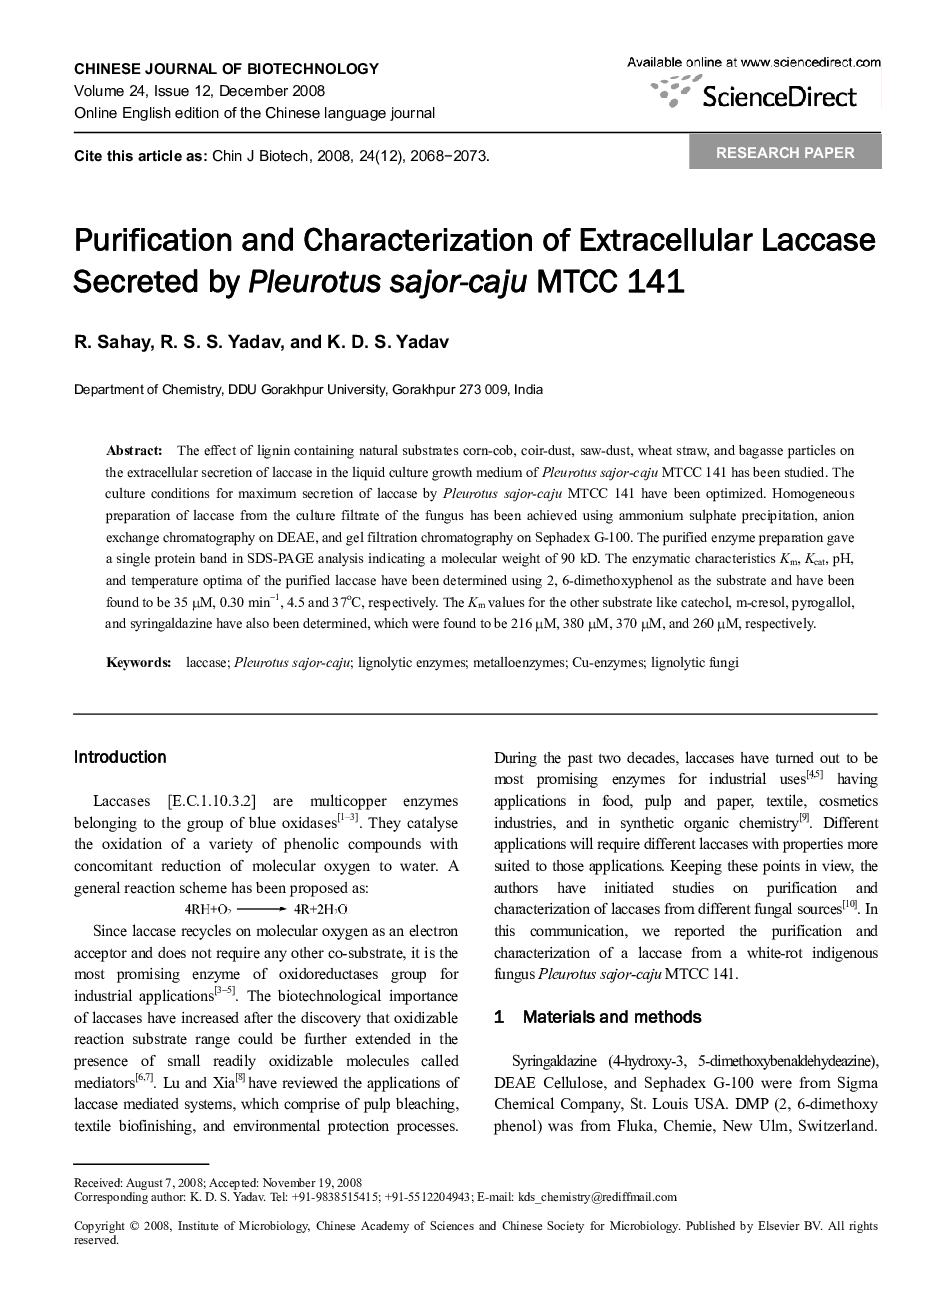 Purification and Characterization of Extracellular Laccase Secreted by Pleurotus sajor-caju MTCC 141